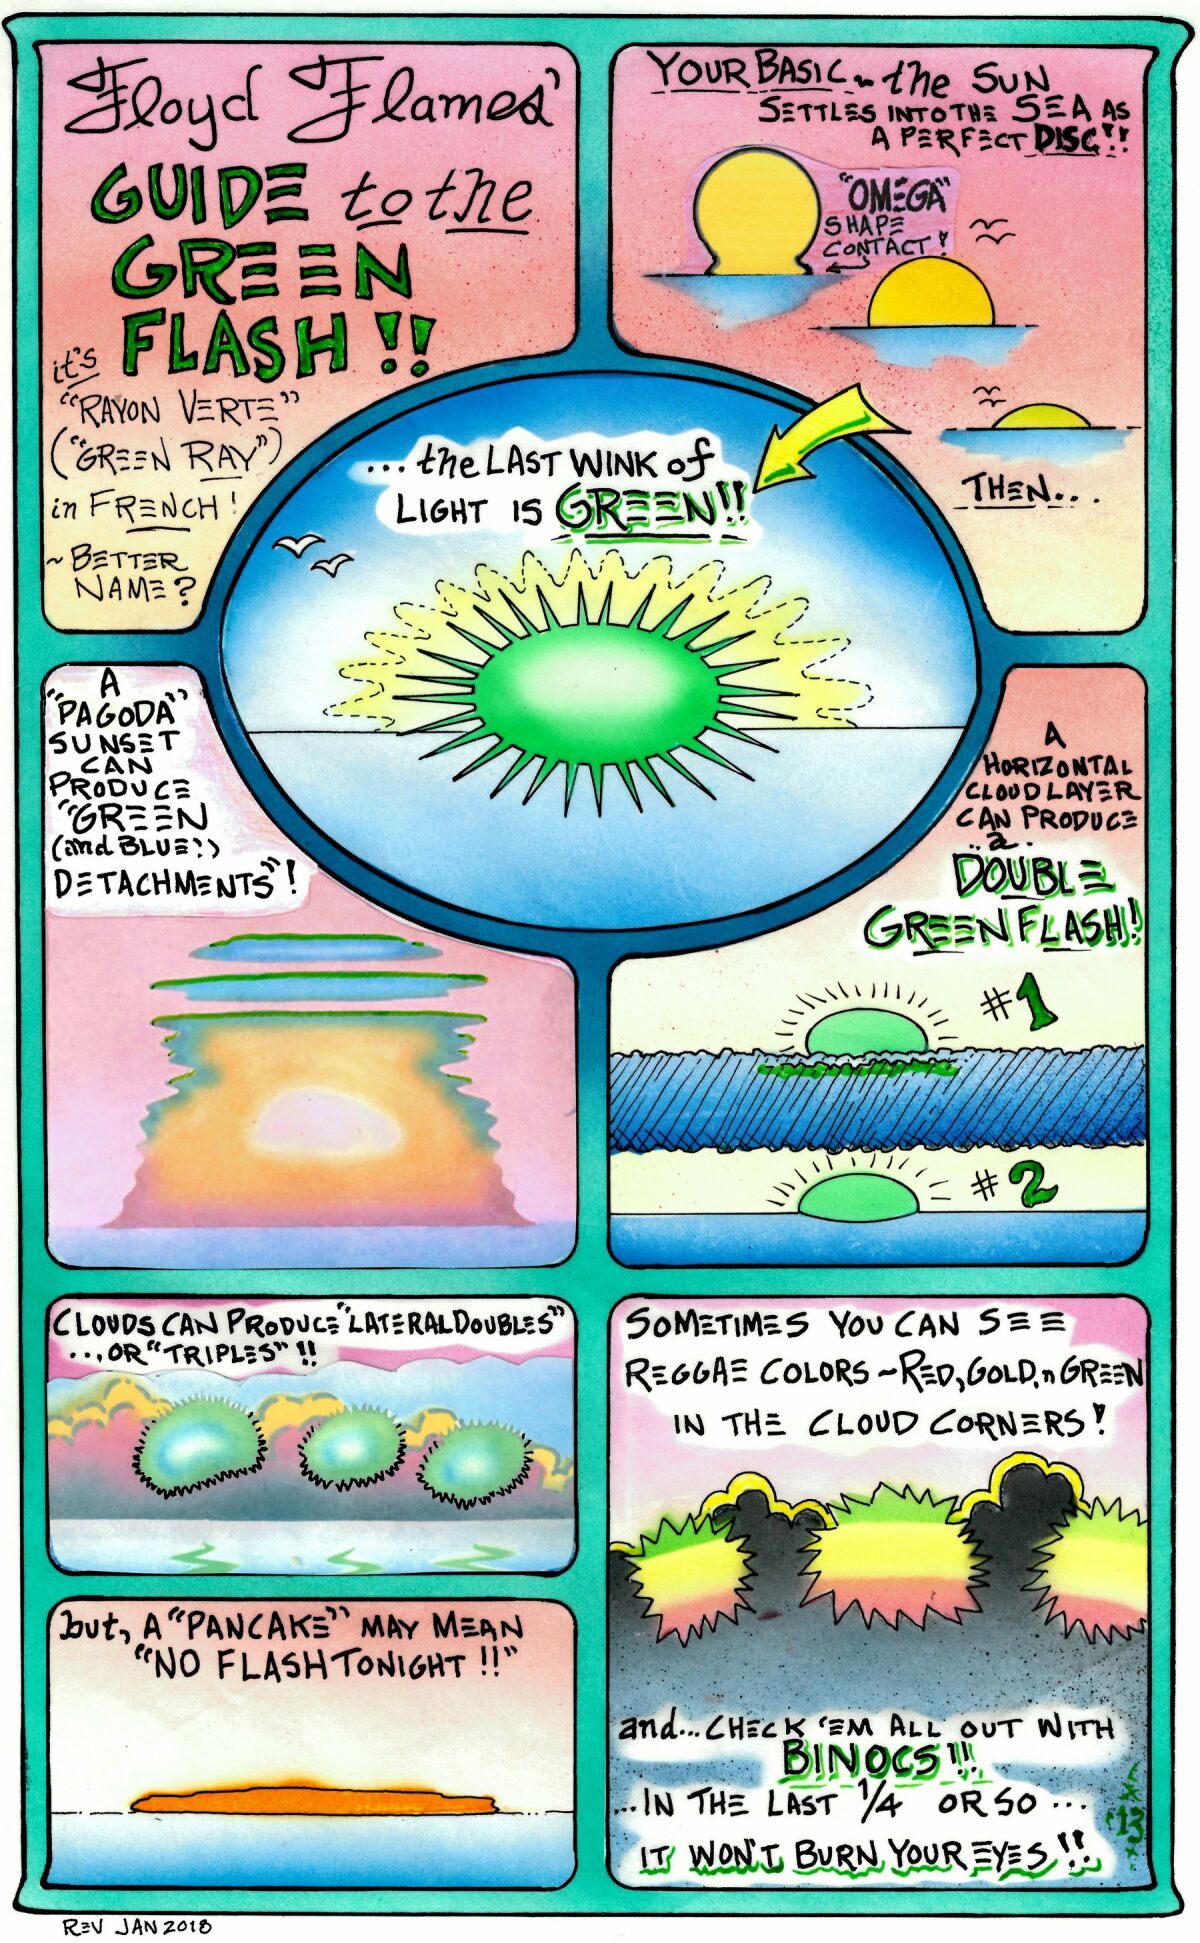 A poster created by Barry Keller (aka Floyd Flames) to explain a green flash.